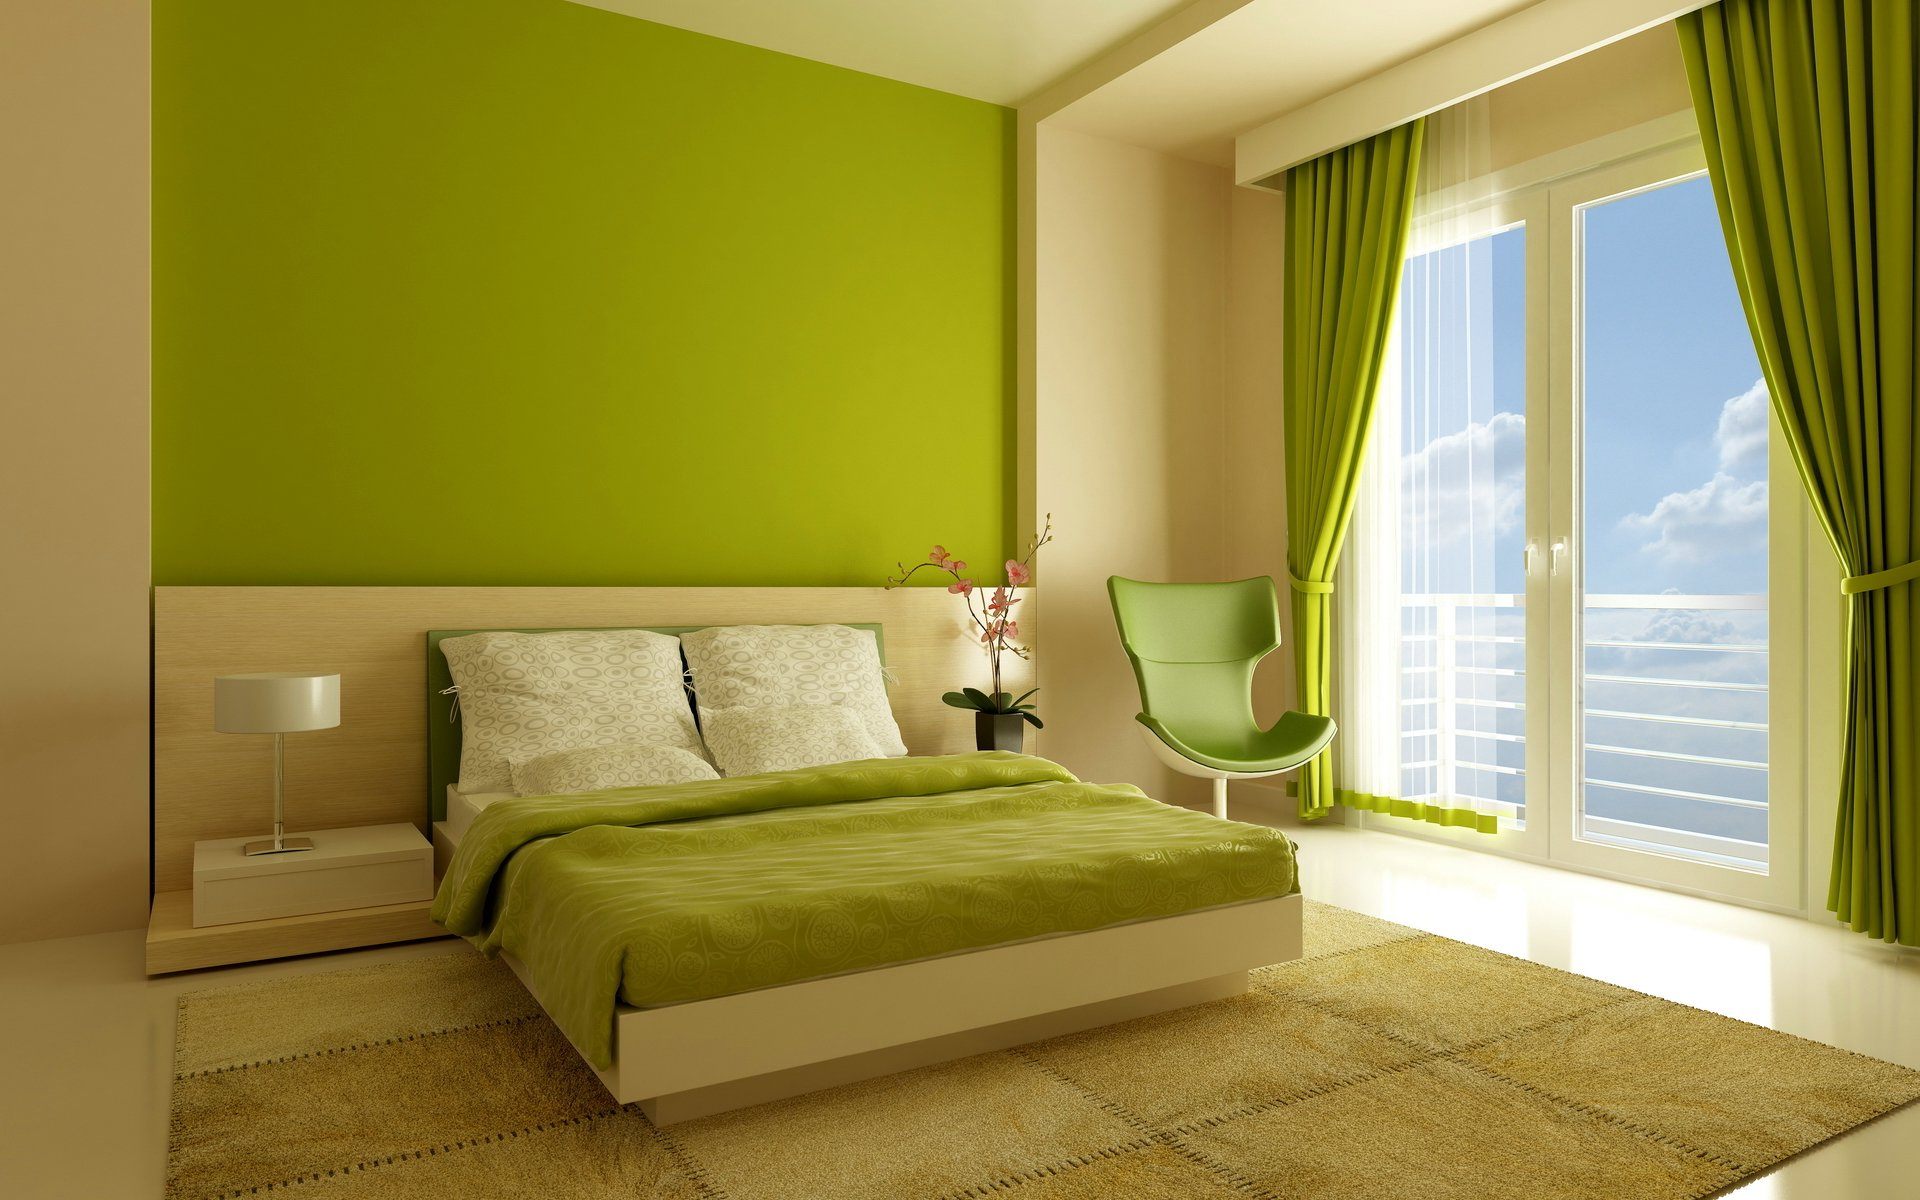 Bedroom for spouses in green tones